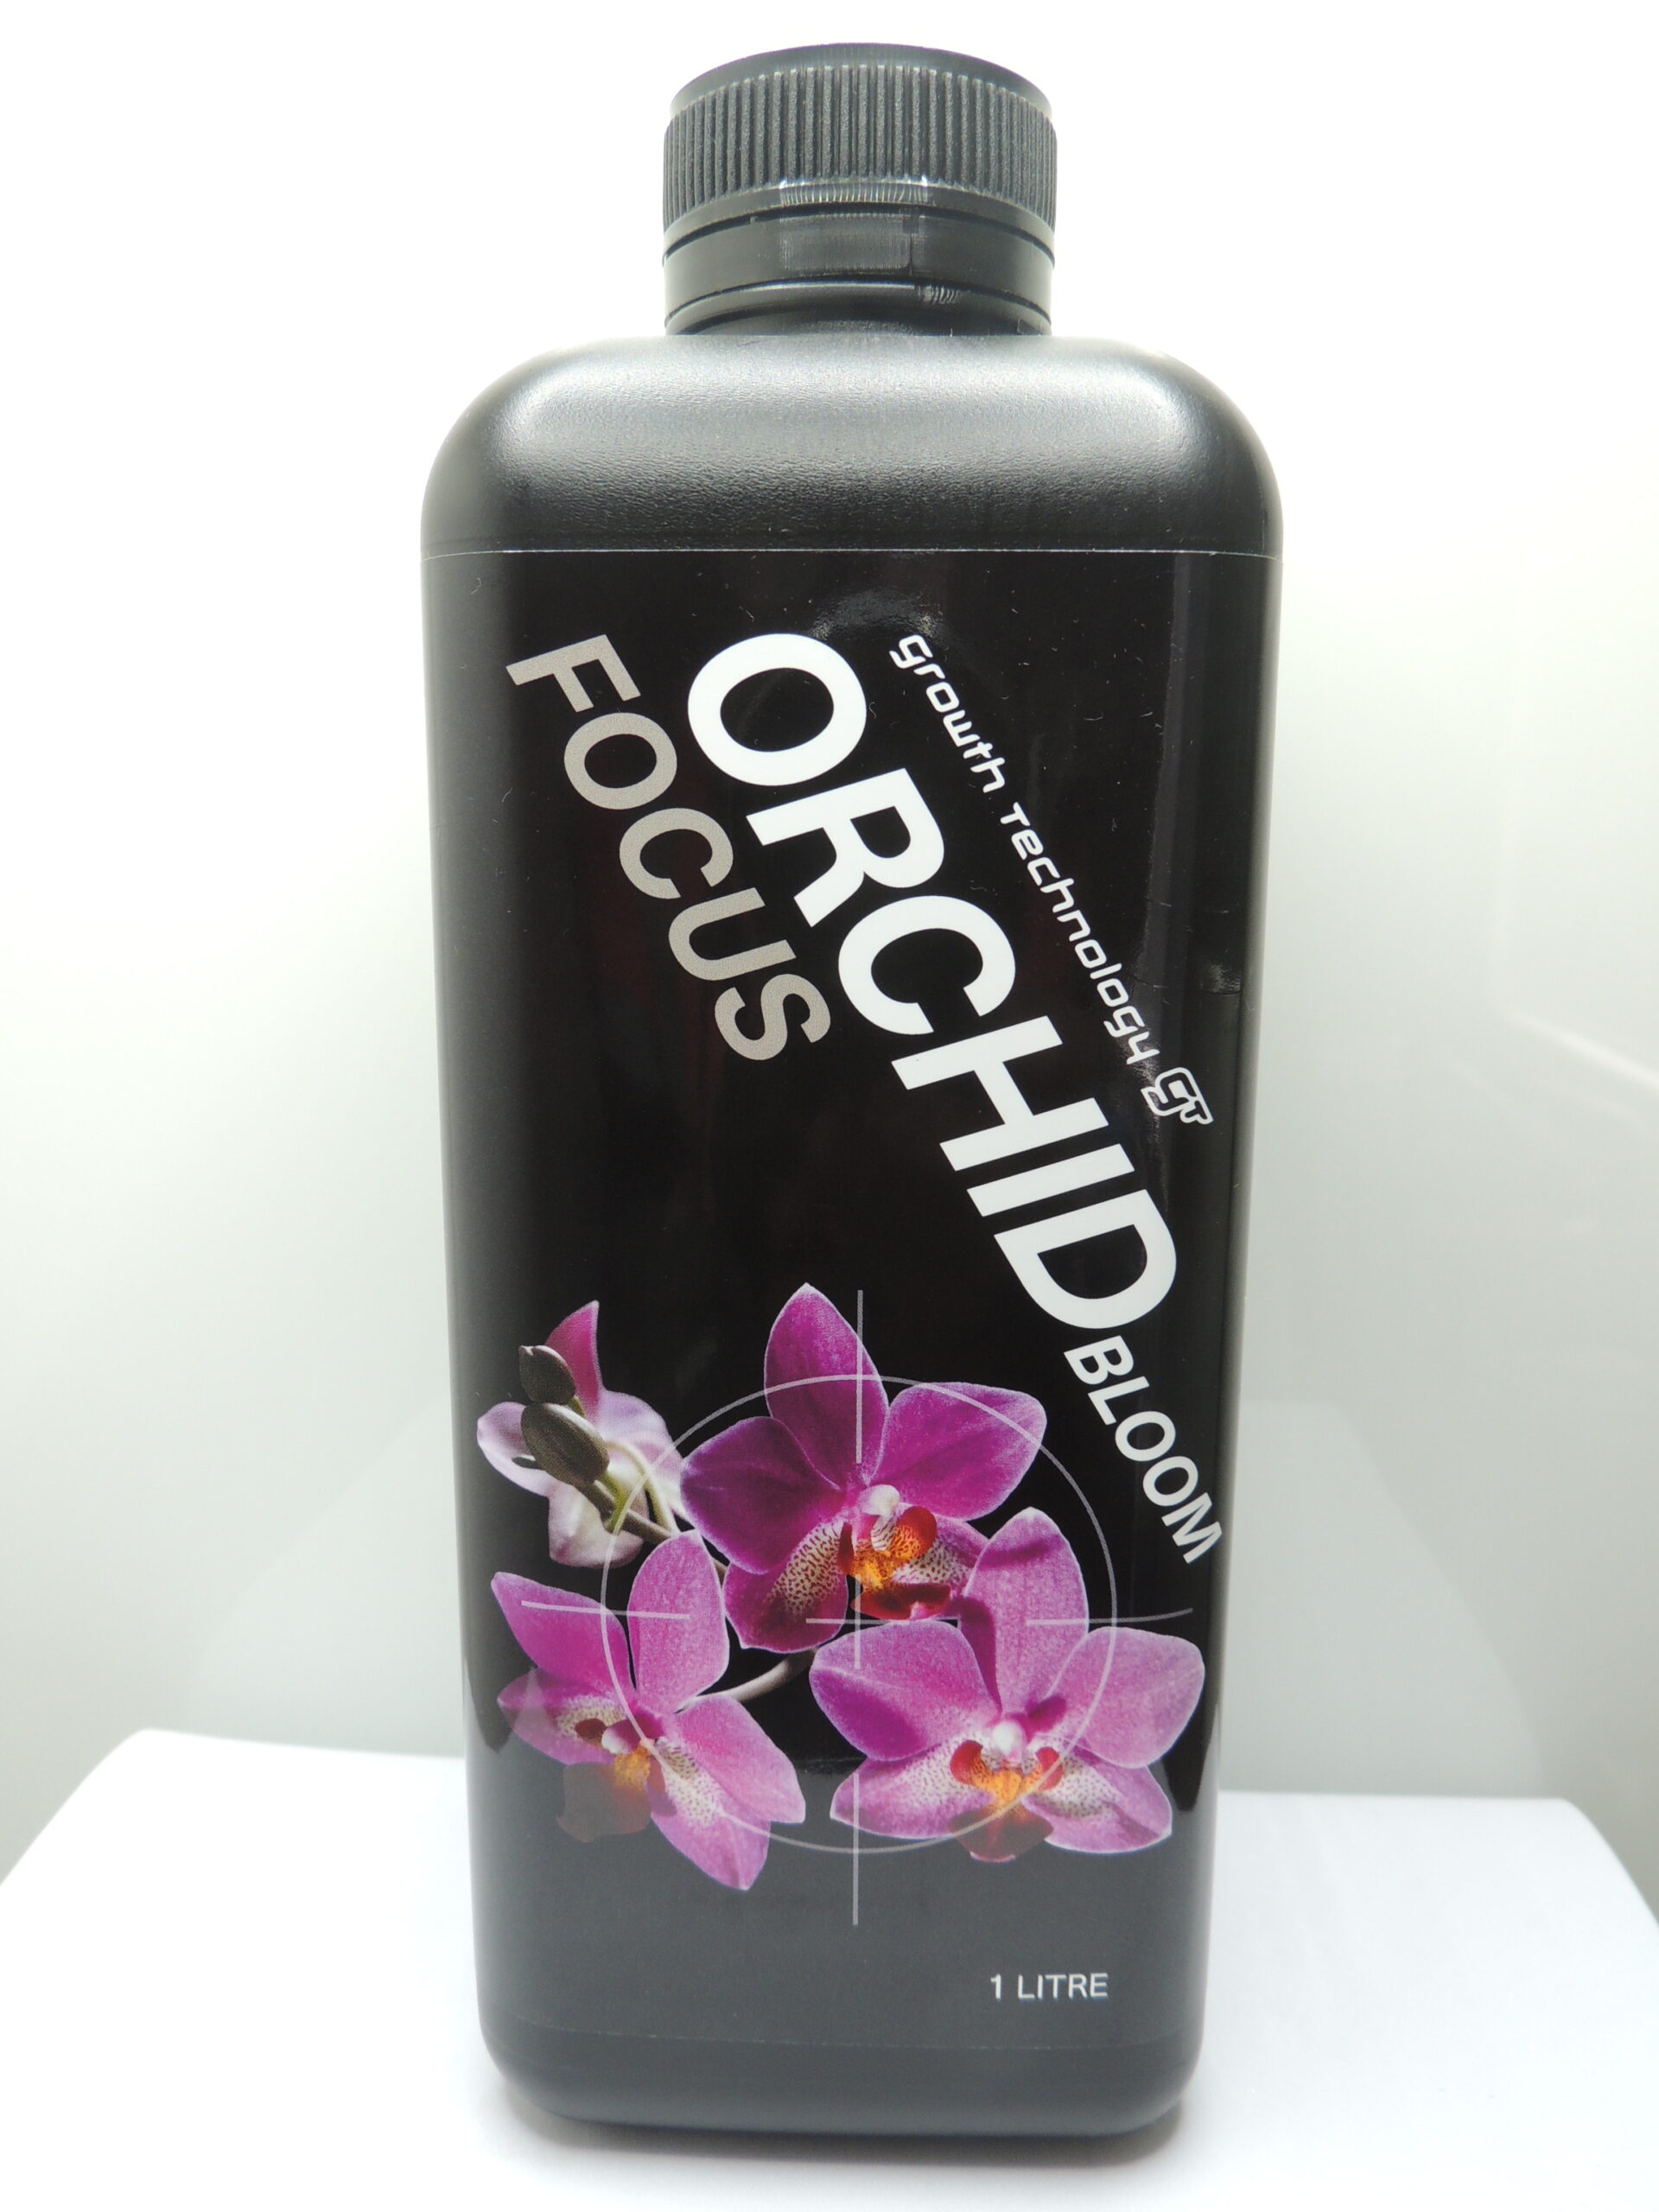 Growth Technology Orchid Focus Bloom 300ml